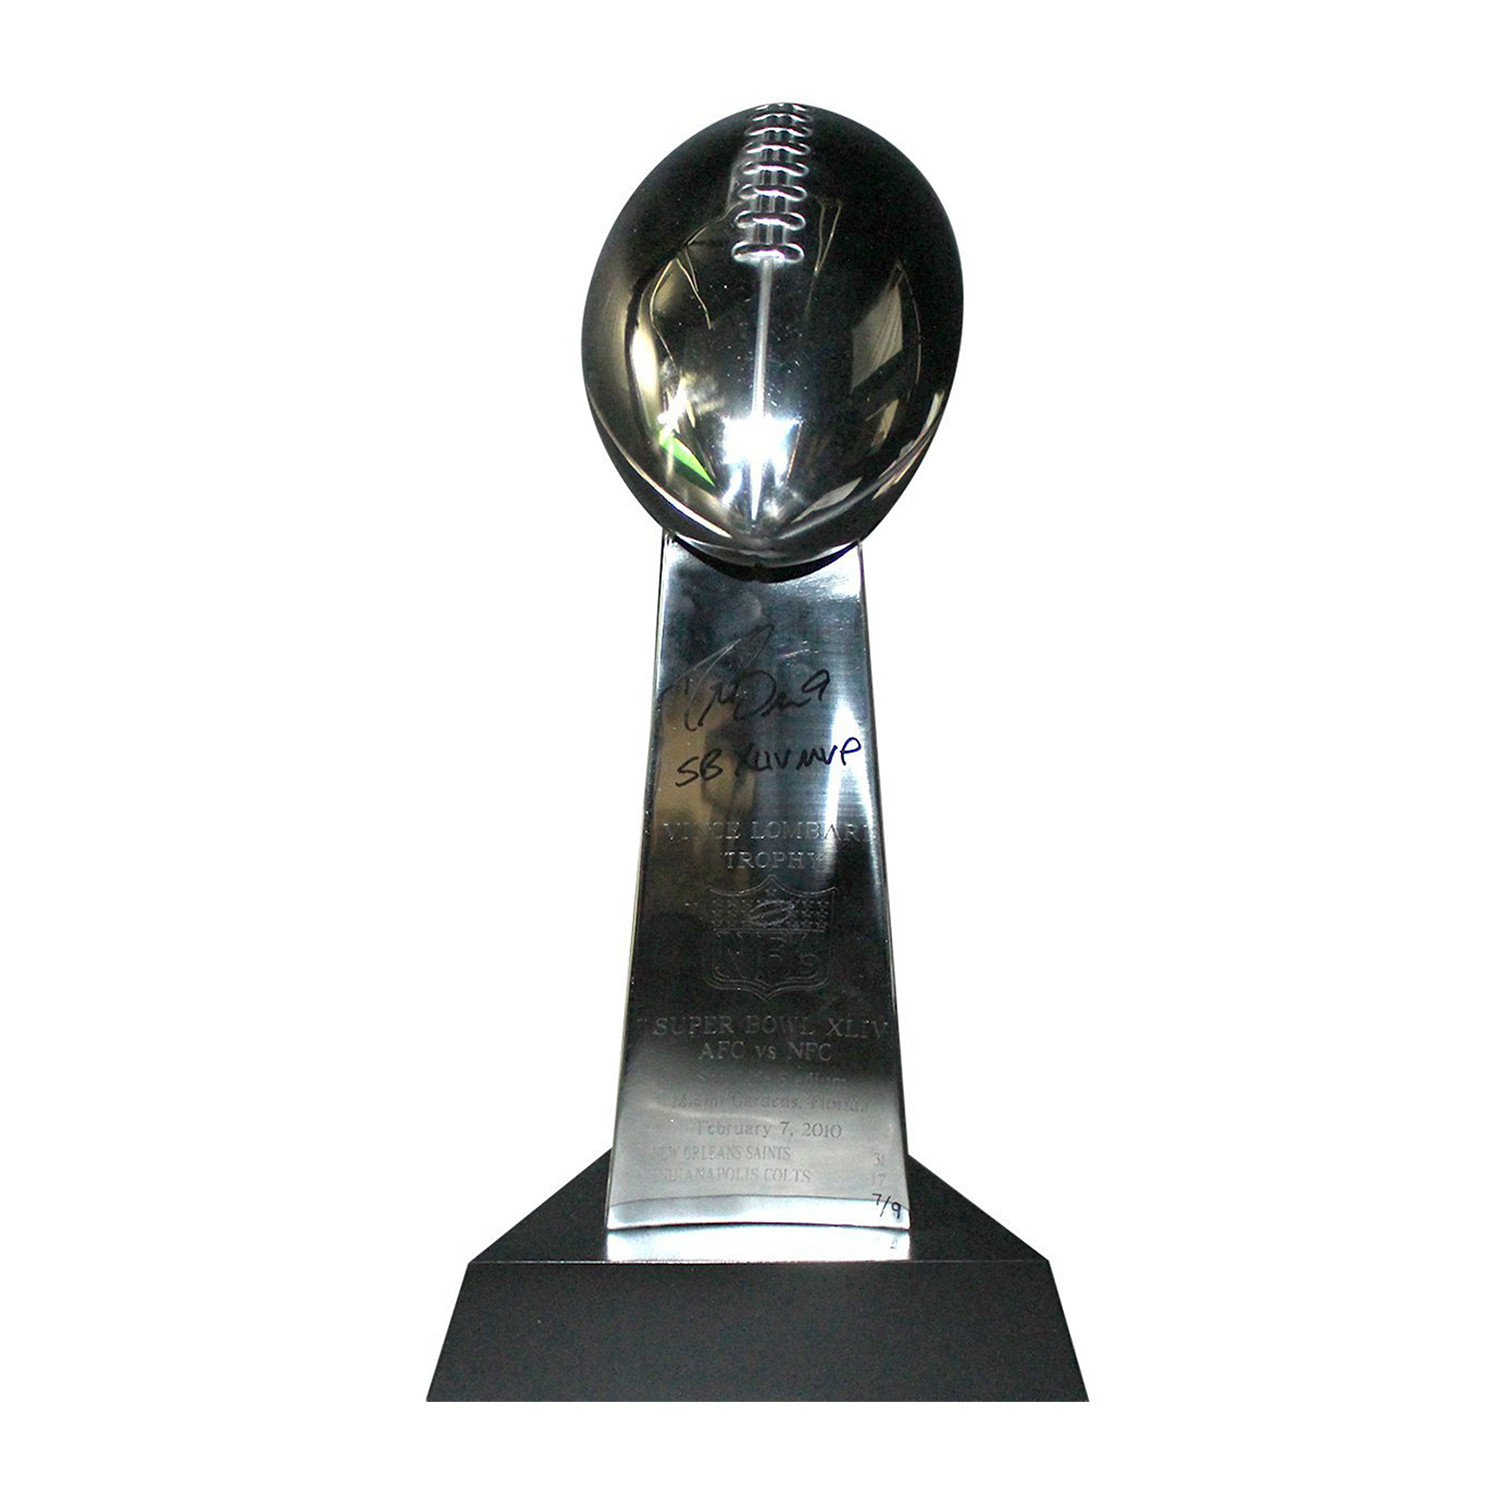 Drew Brees Signed Replica Lombardi Trophy - Steiner Sports - Touch of